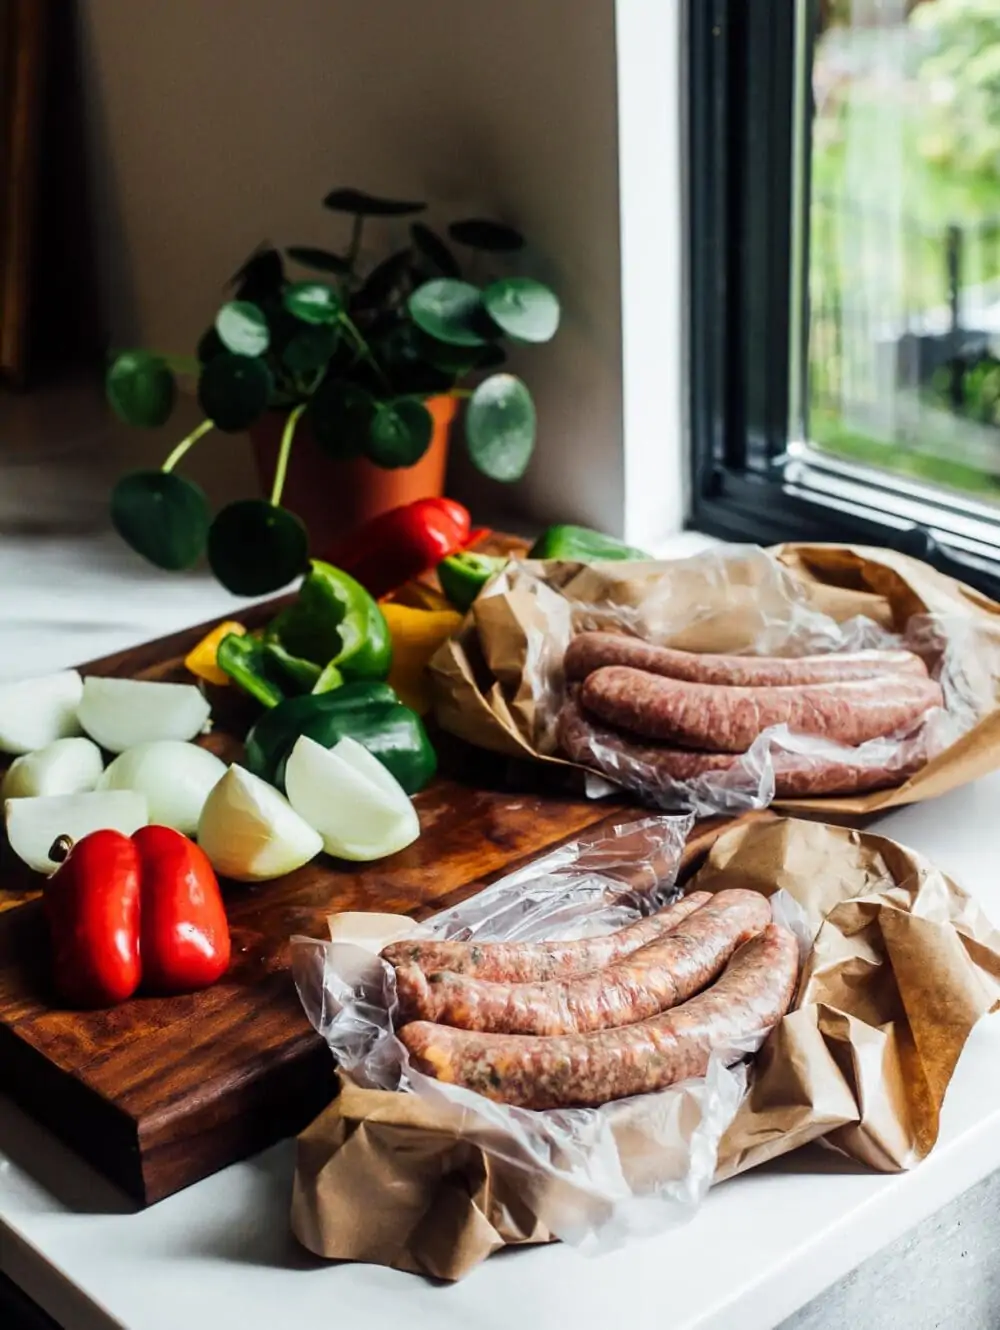 fresh brats sitting on a kitchen counter amongst a wooden cutting board with vegetables.